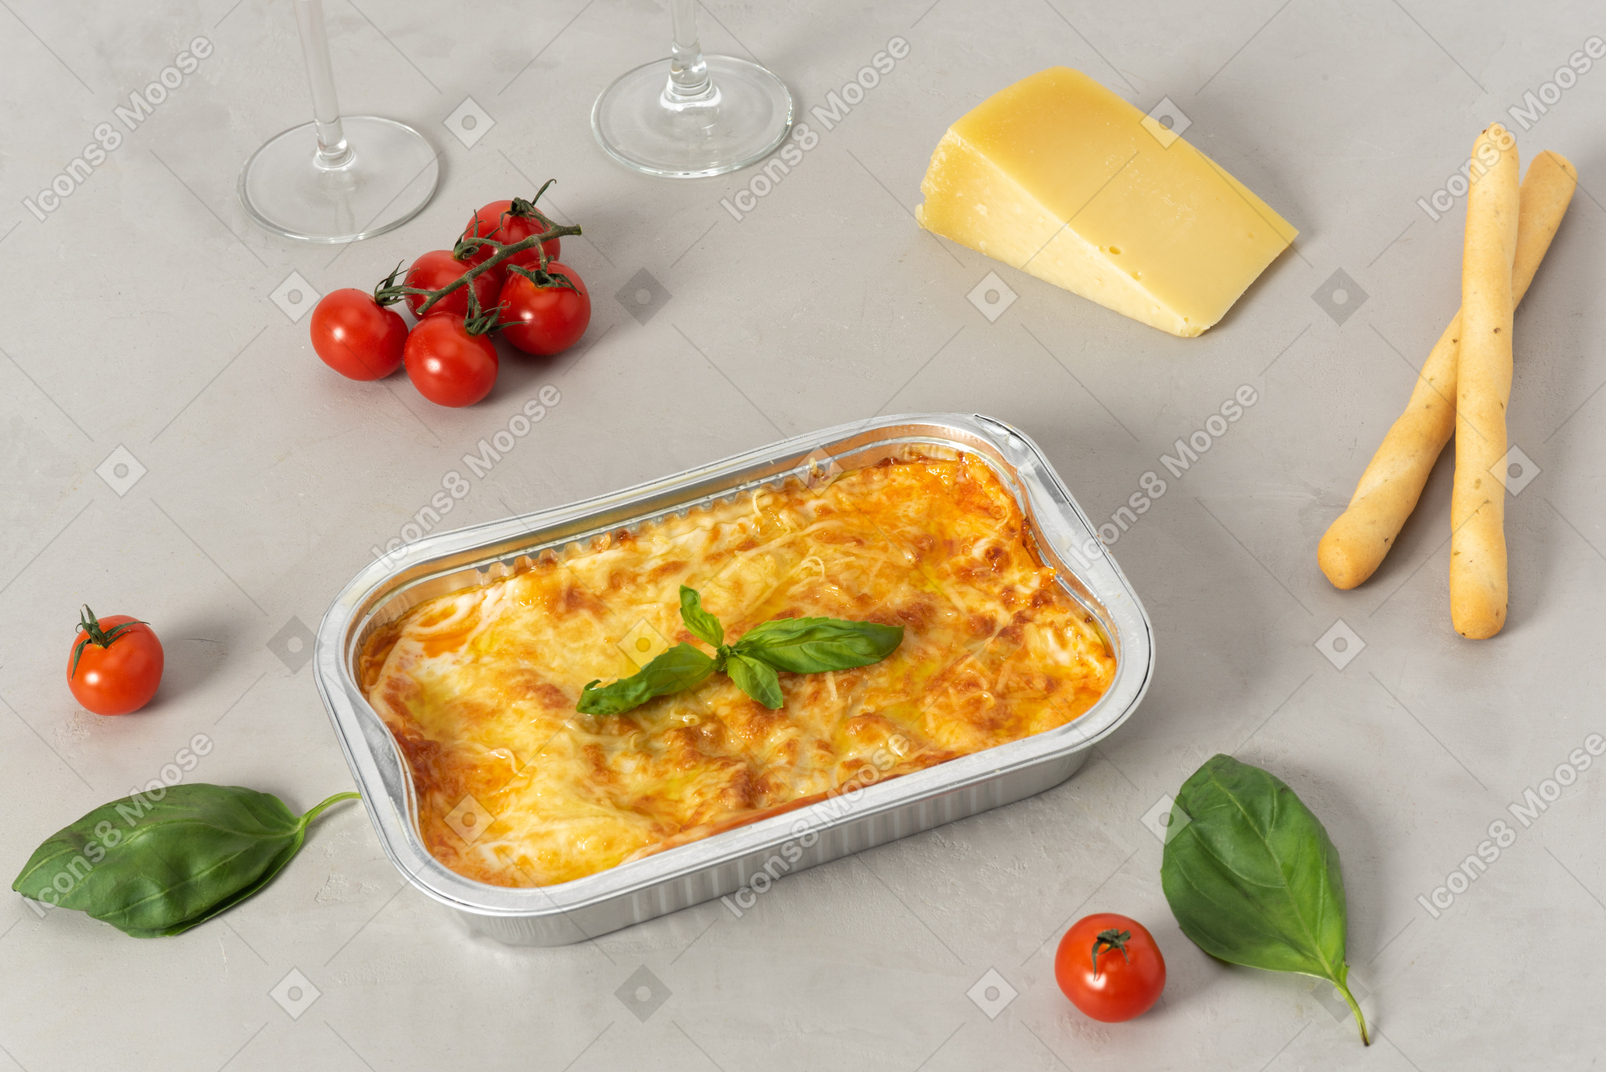 Piece of lasagna, cheese, cherry tomatoes, grissini and glasses 